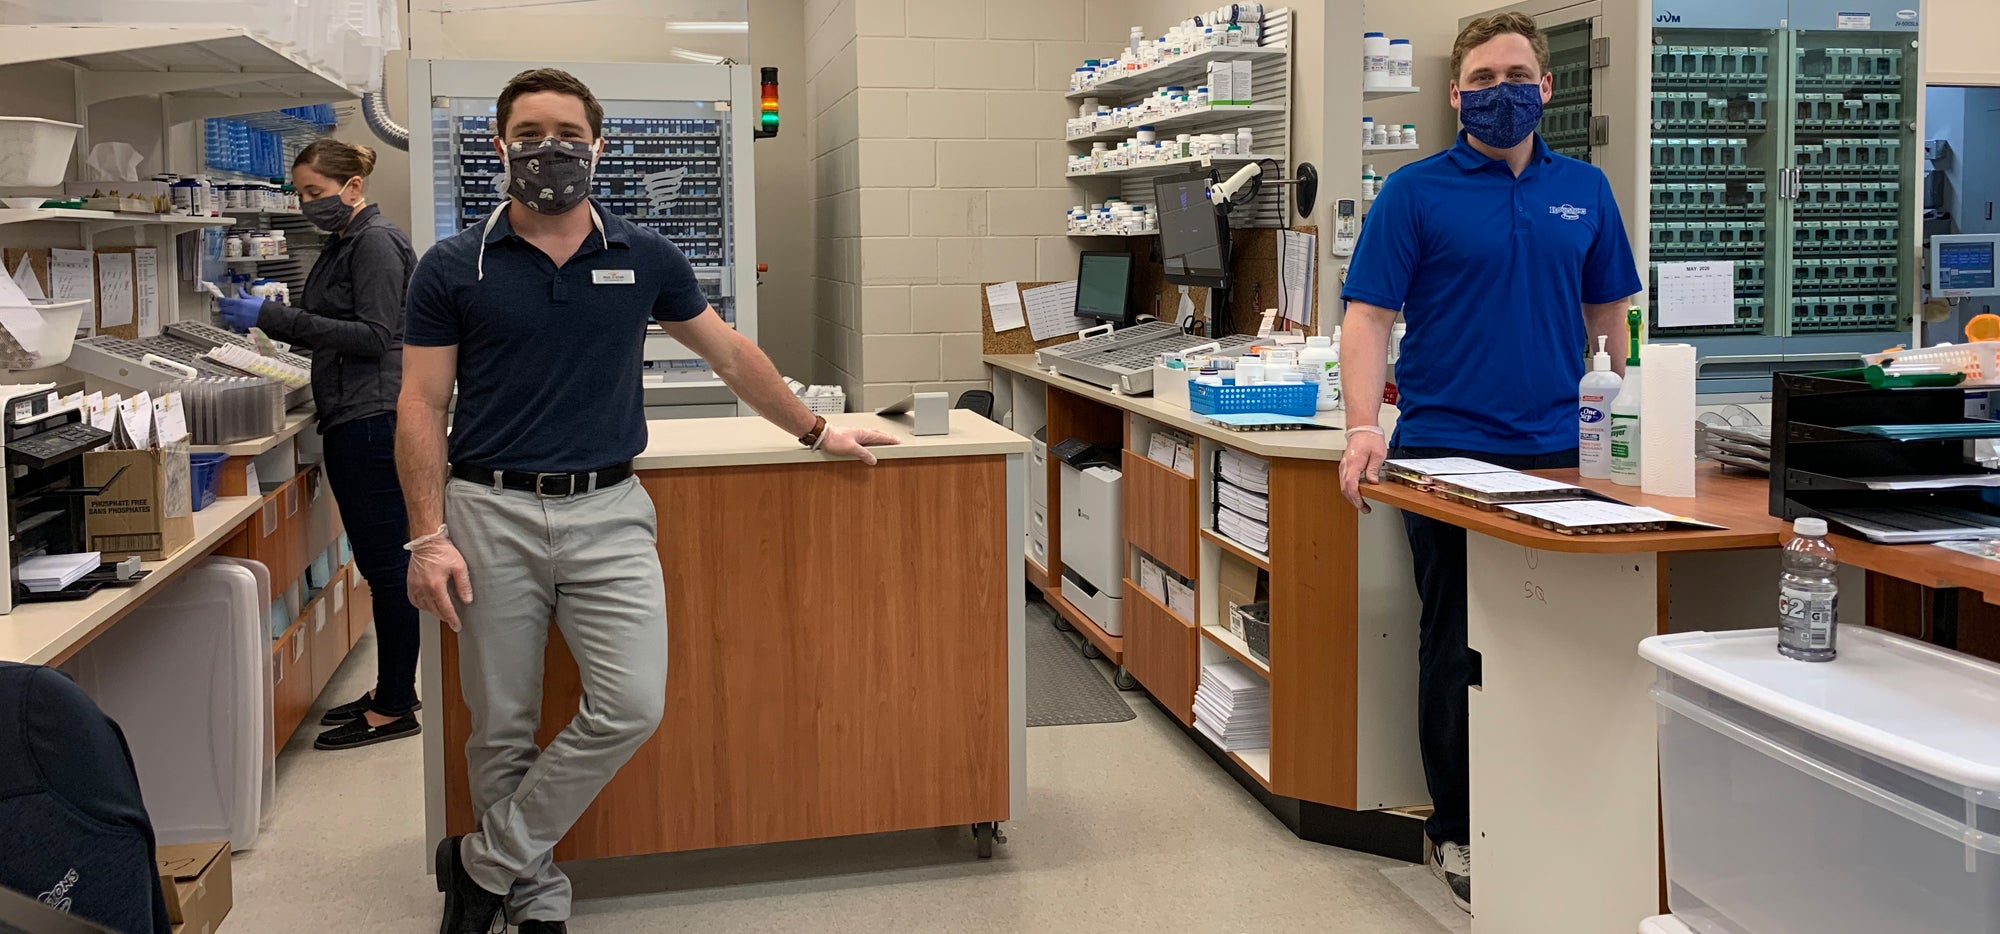 Peter and Paul standing in their pharmacy wearing masks